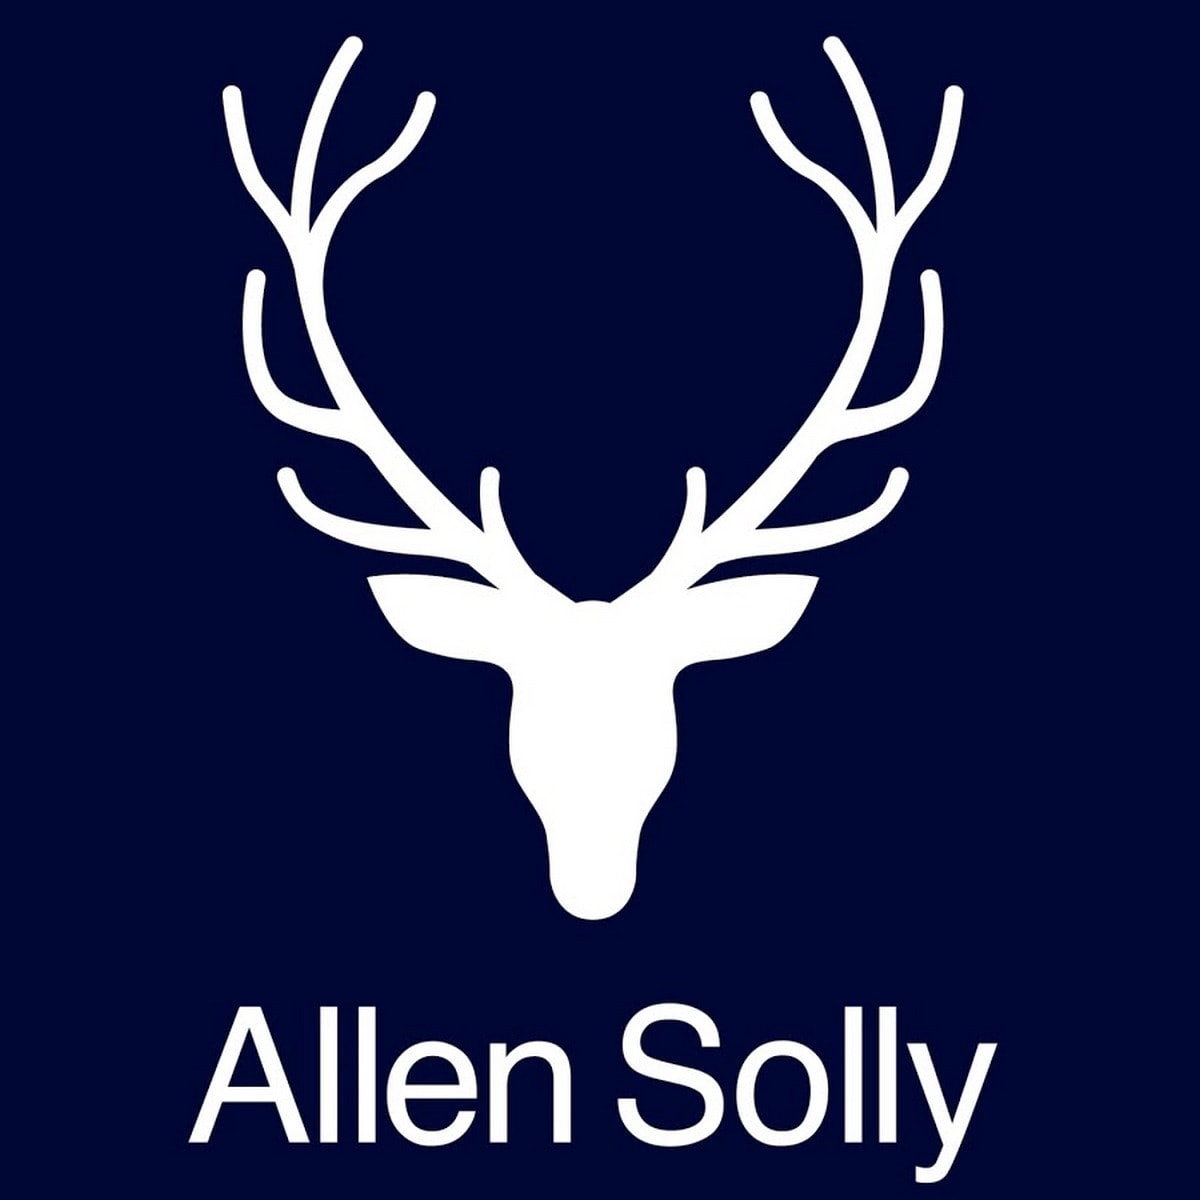 is allen solly a good brand